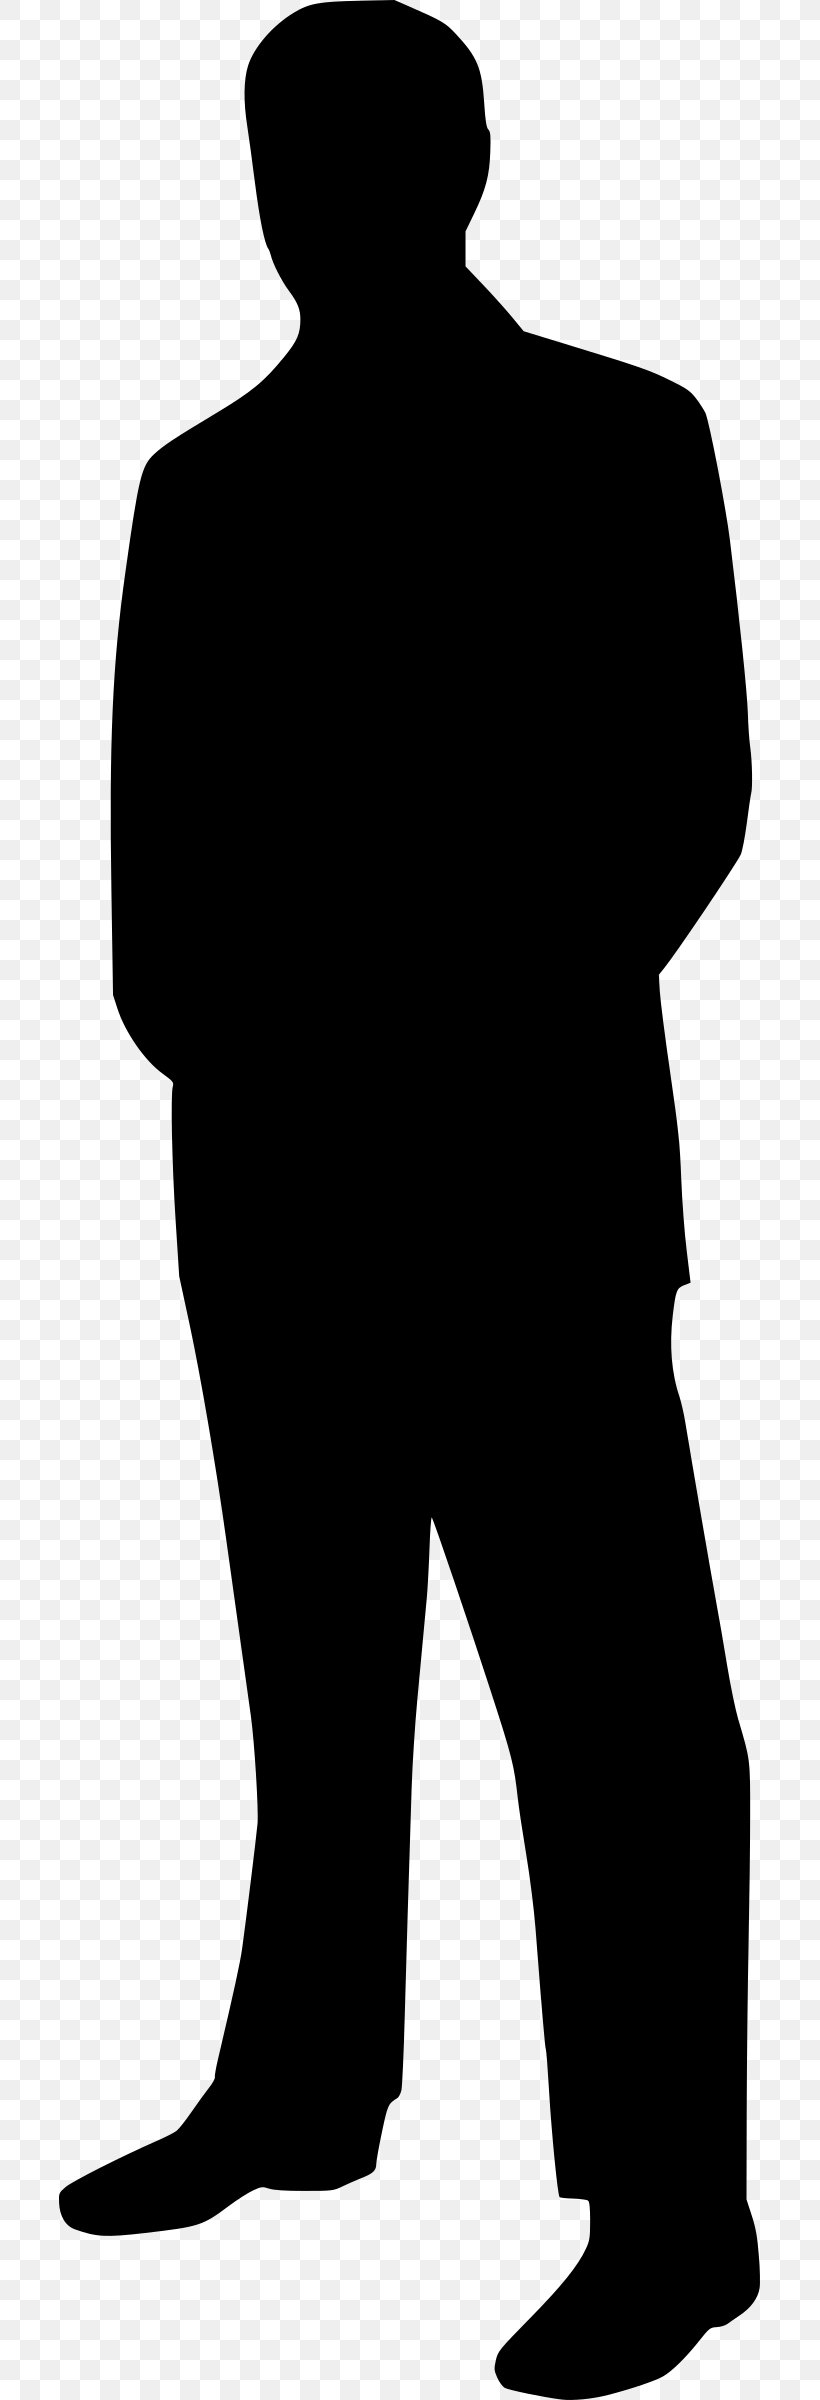 Silhouette Clip Art, PNG, 701x2400px, Silhouette, Art, Black, Black And White, Businessperson Download Free